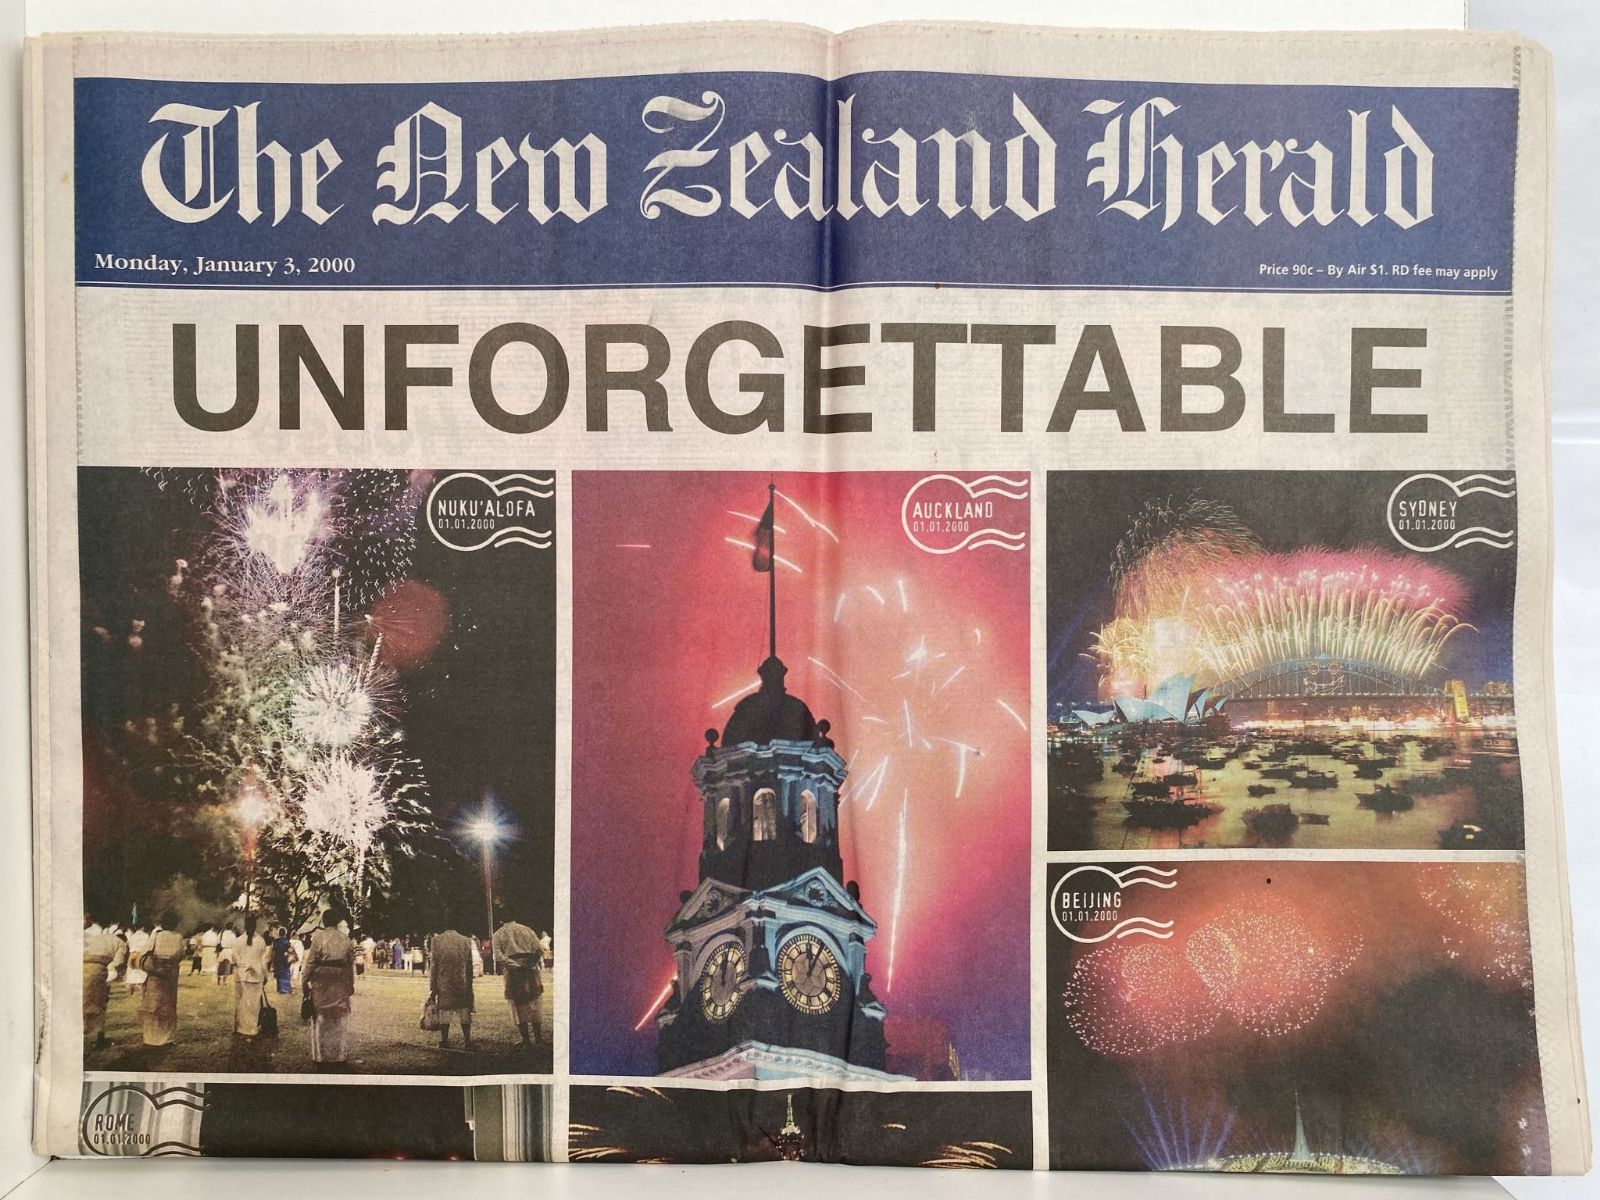 OLD NEWSPAPER: The New Zealand Herald, 3rd January 2000